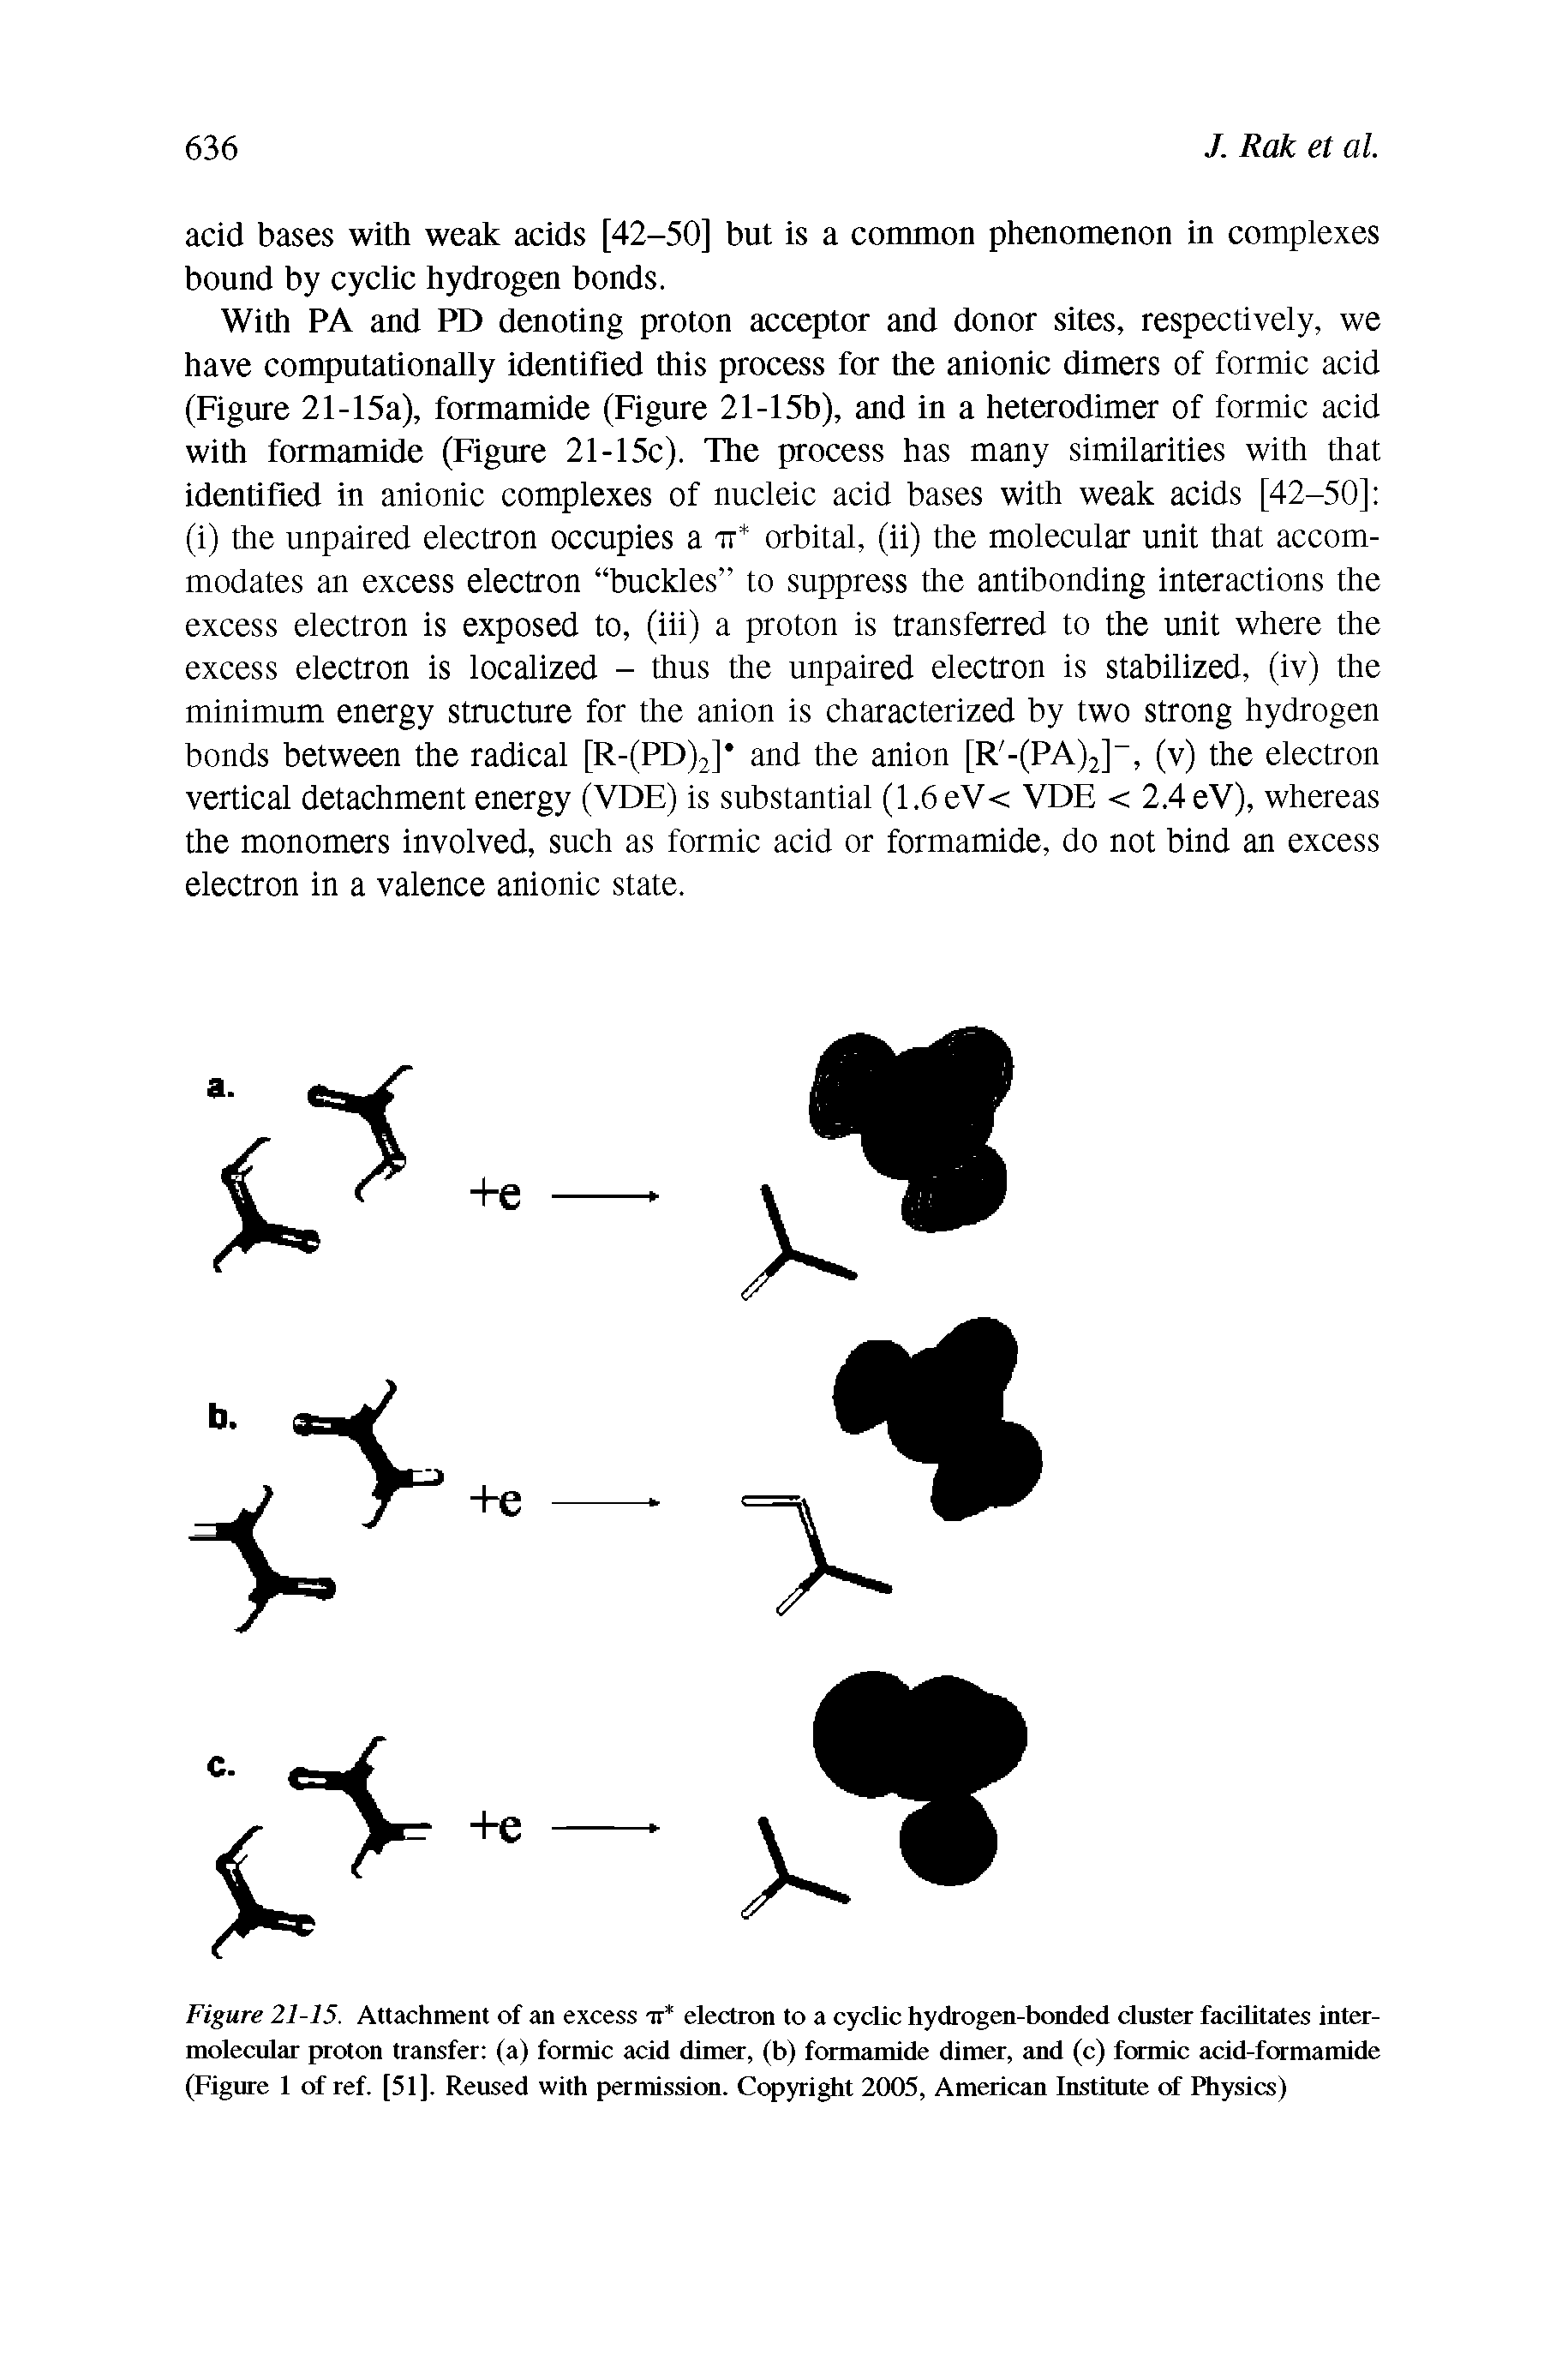 Figure 21-15. Attachment of an excess tt electron to a cyclic hydrogen-bonded cluster facilitates inter-molecular proton transfer (a) formic acid dimer, (b) formamide dimer, and (c) formic acid-formamide (Figure 1 of ref. [51]. Reused with permission. Copyright 2005, American Institute of Physics)...